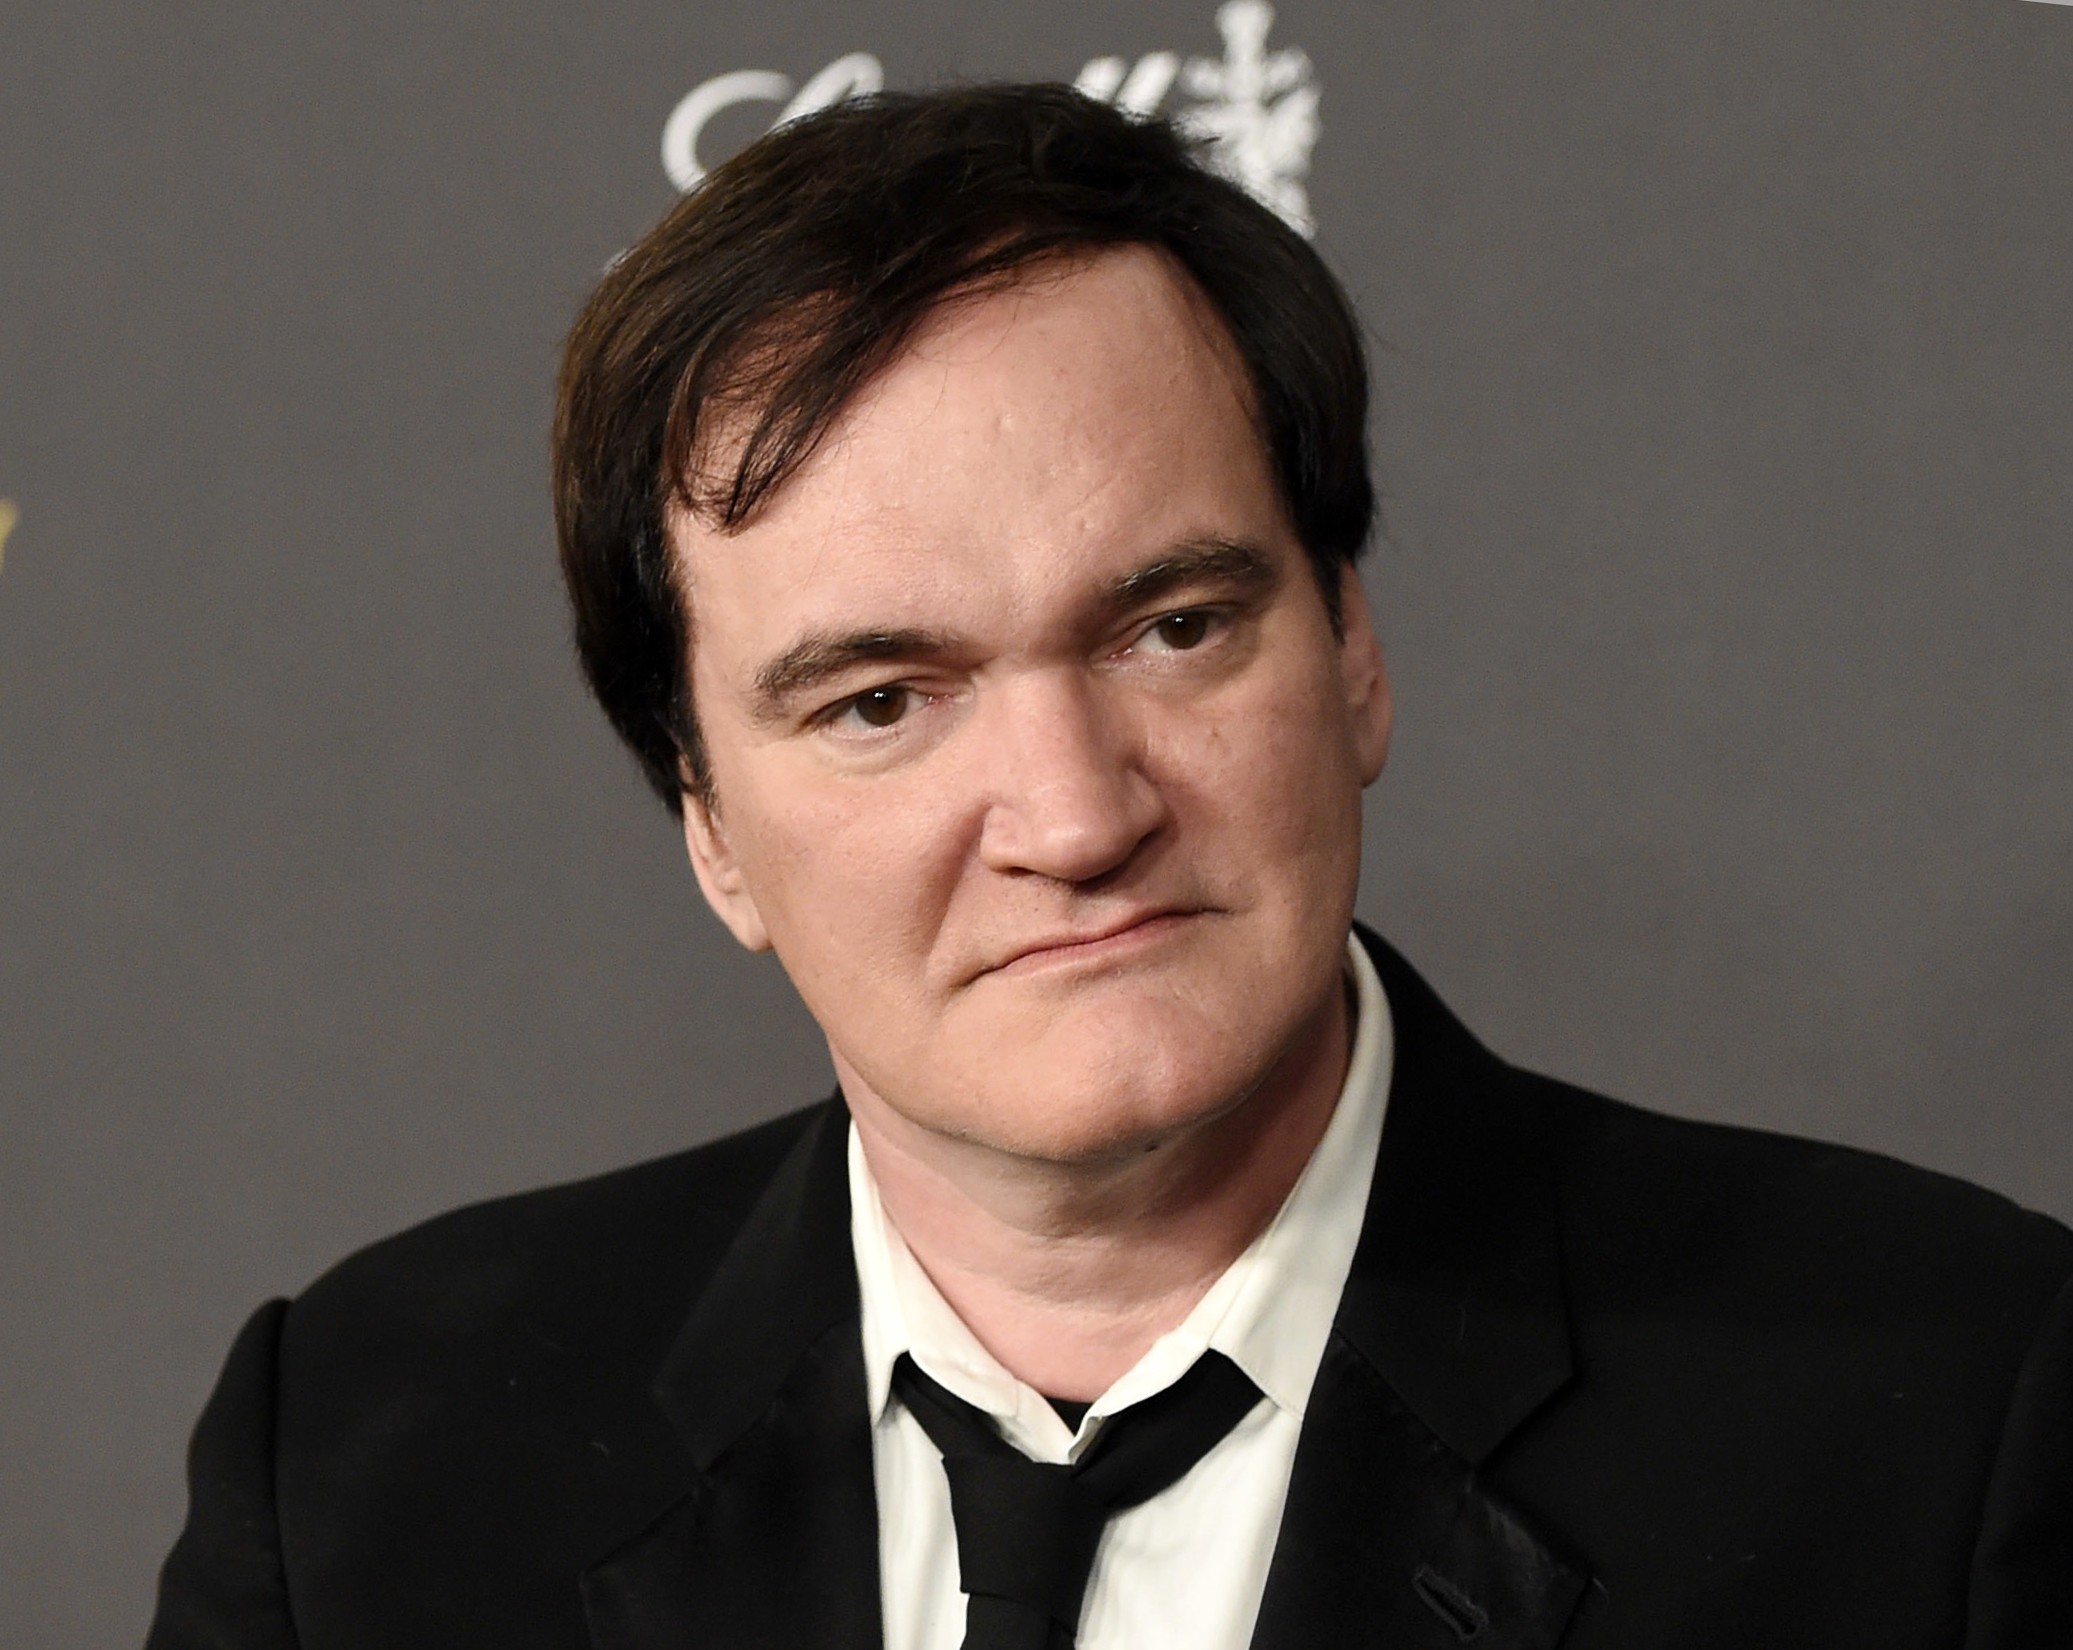 Quentin Tarantino has apologised to Roman Polanski rape victim Samantha Geimer for comments he made in a 2003 radio interview with Howard Stern. Photo: AP